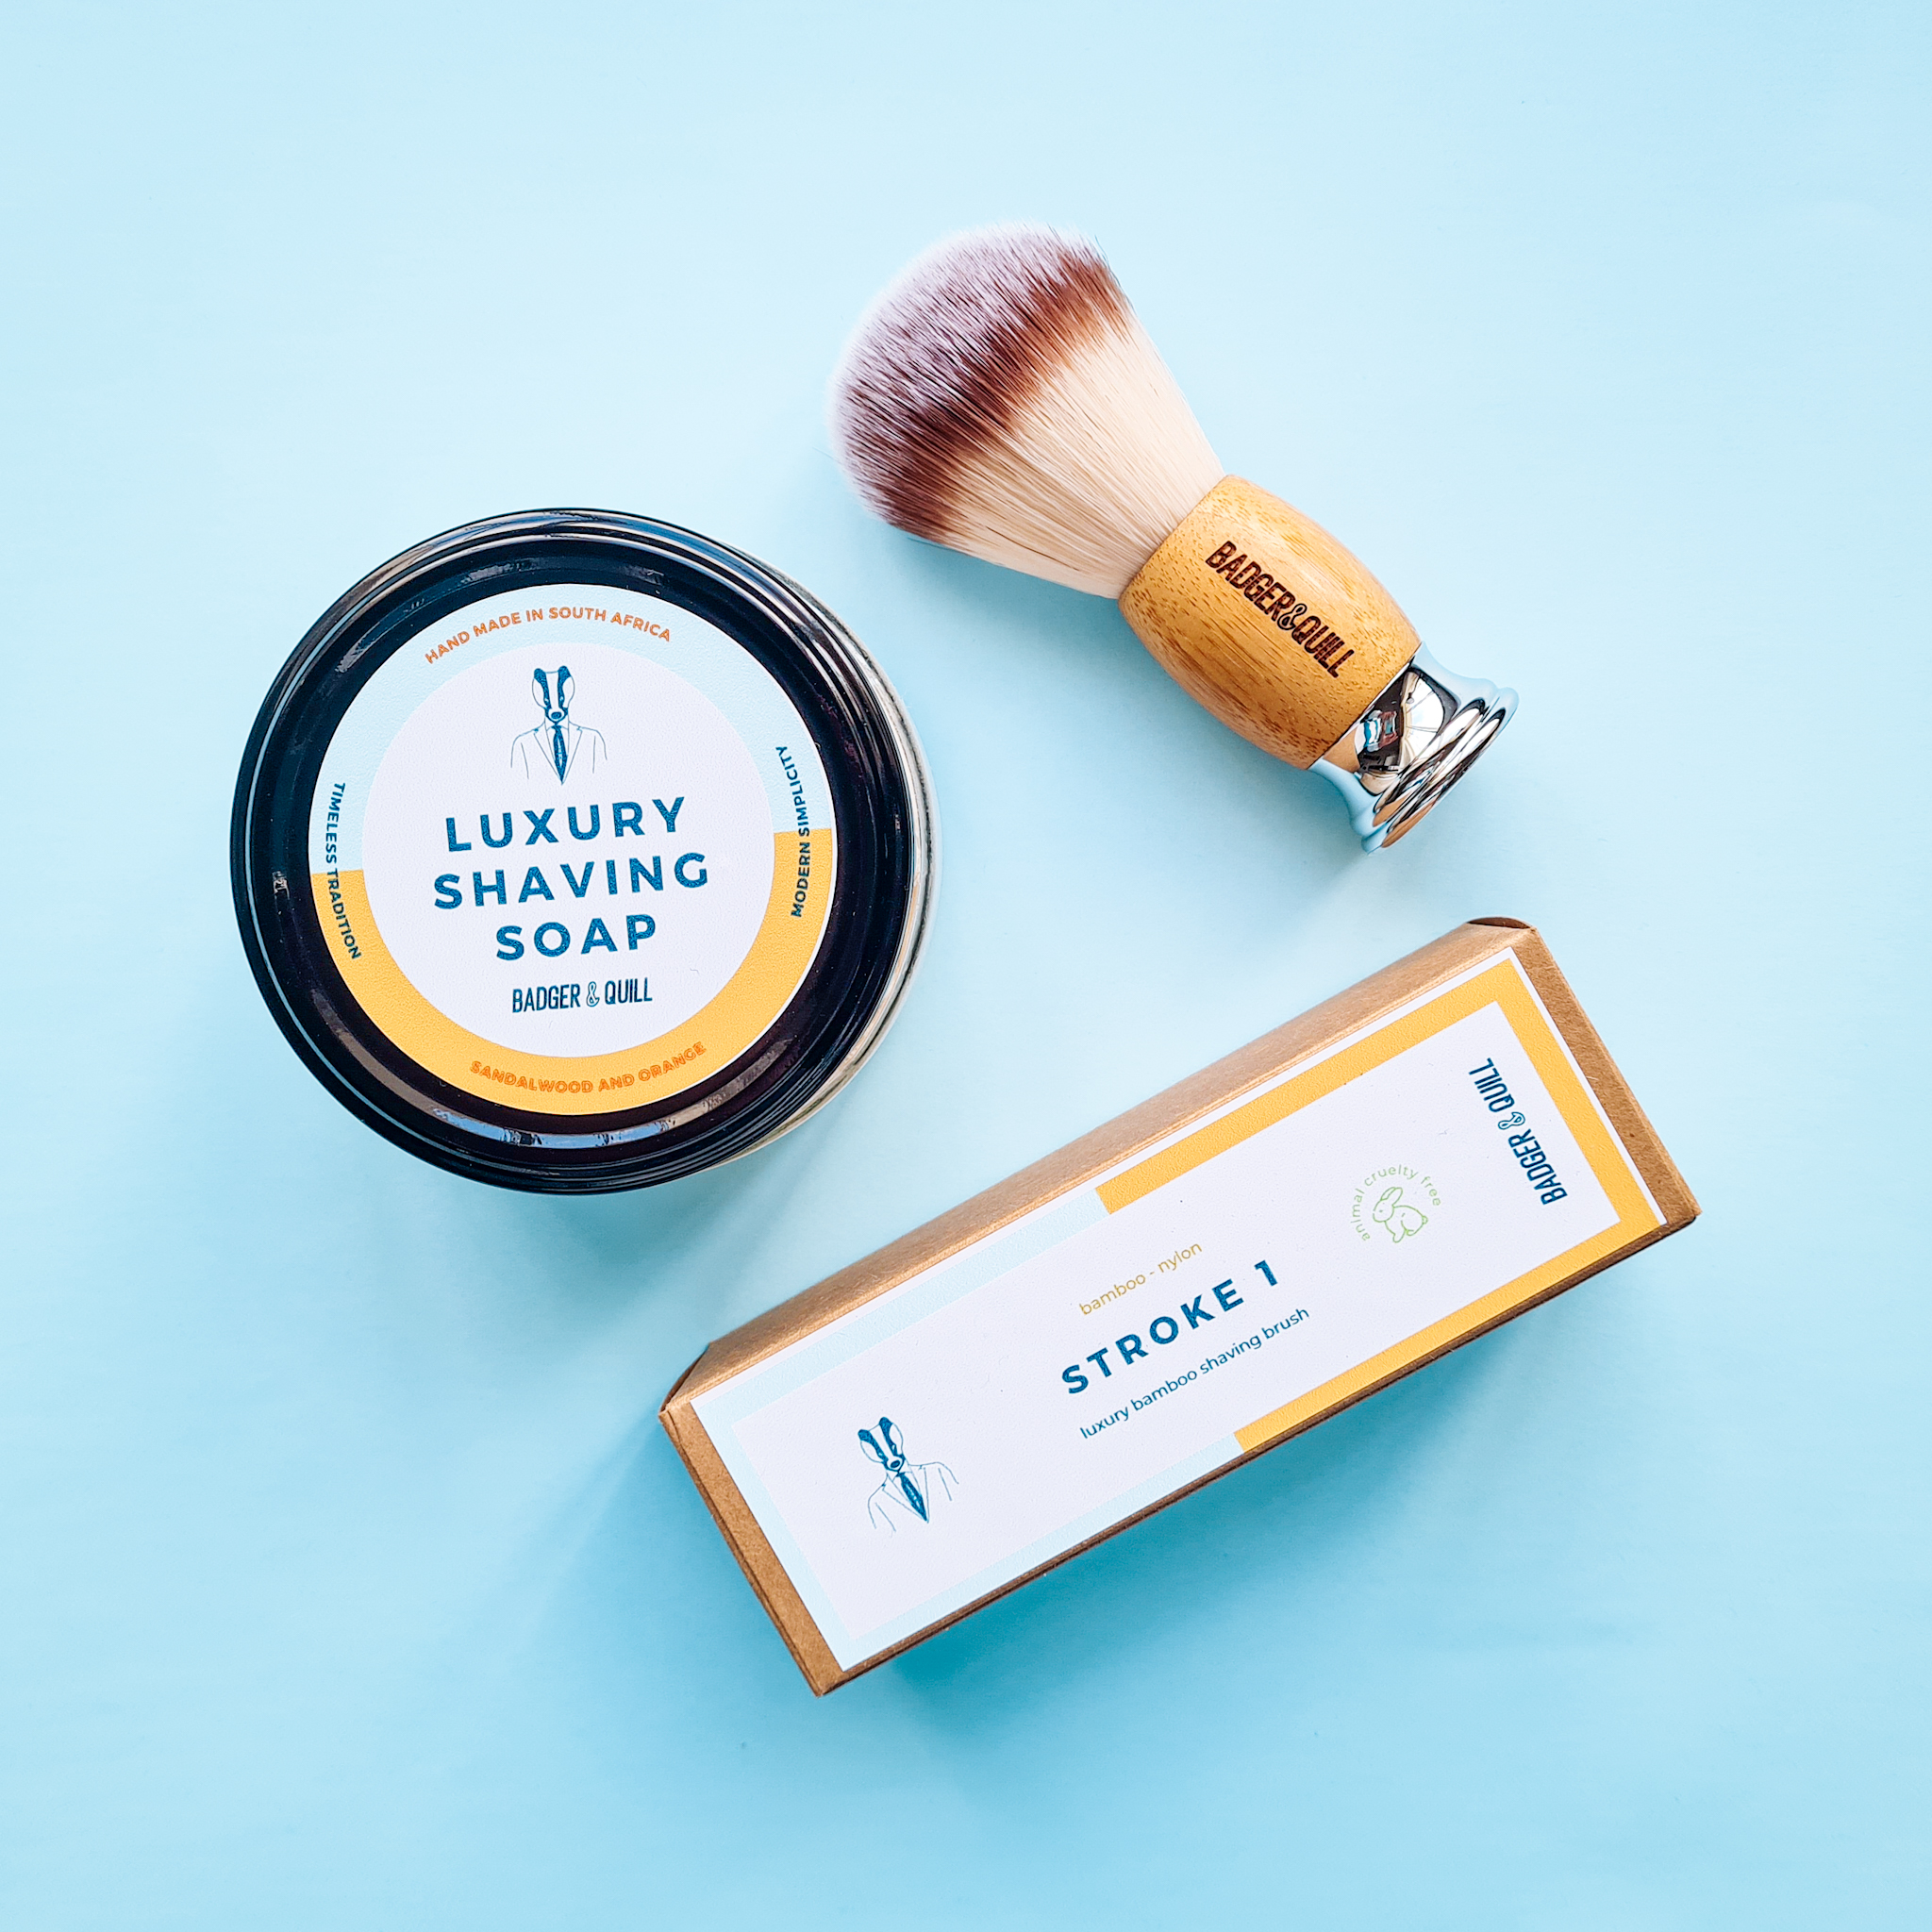 Stroke 1 and Soap Combo (Save 10%) - Badger & Quill